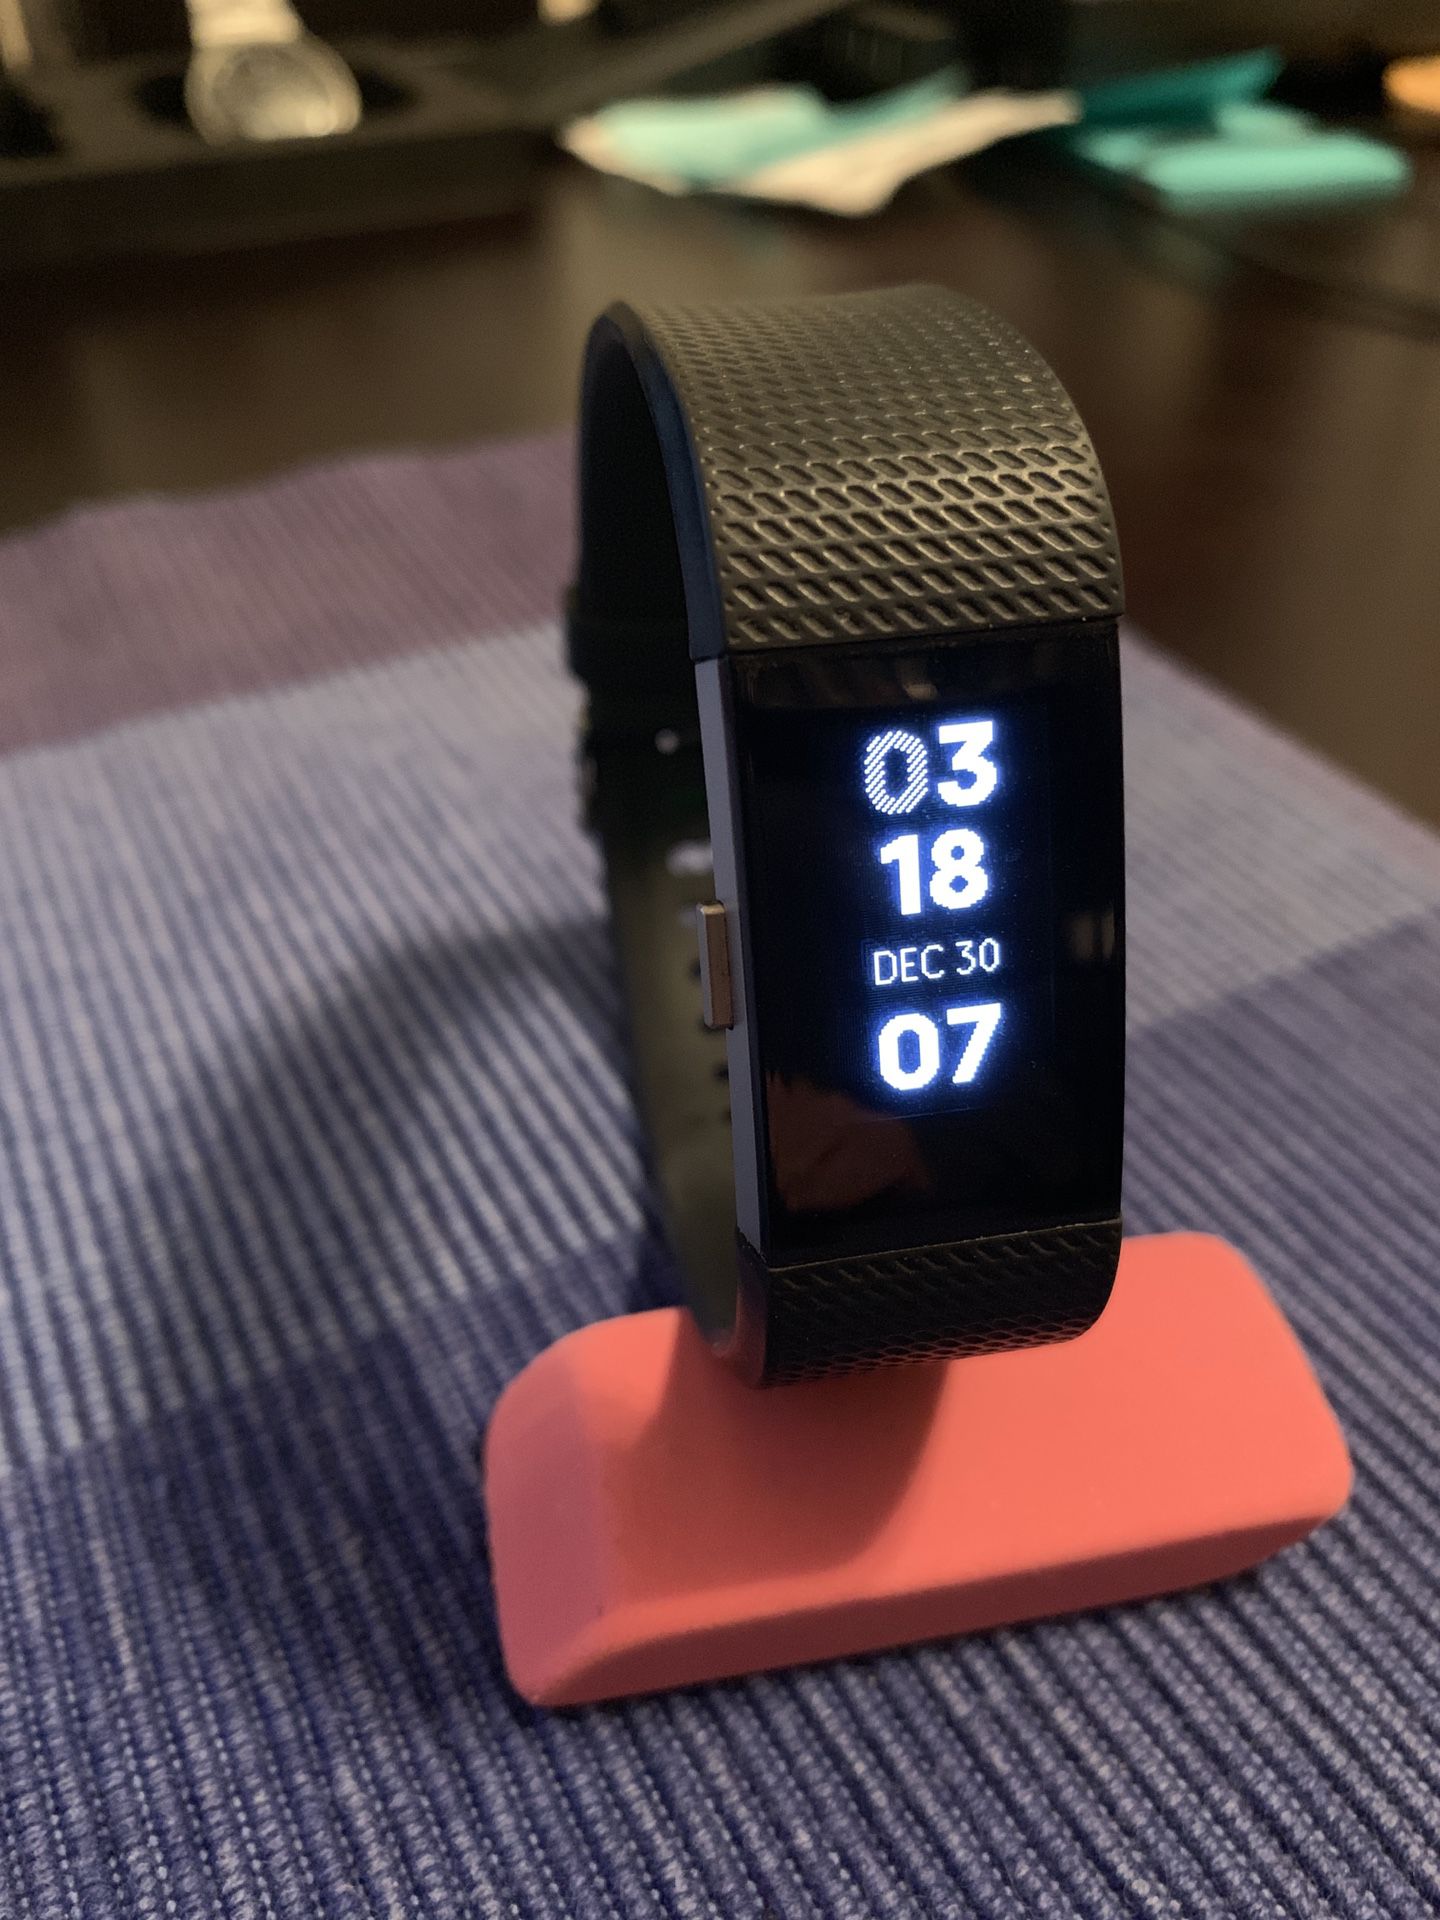 Fitbit Charge 2 Black